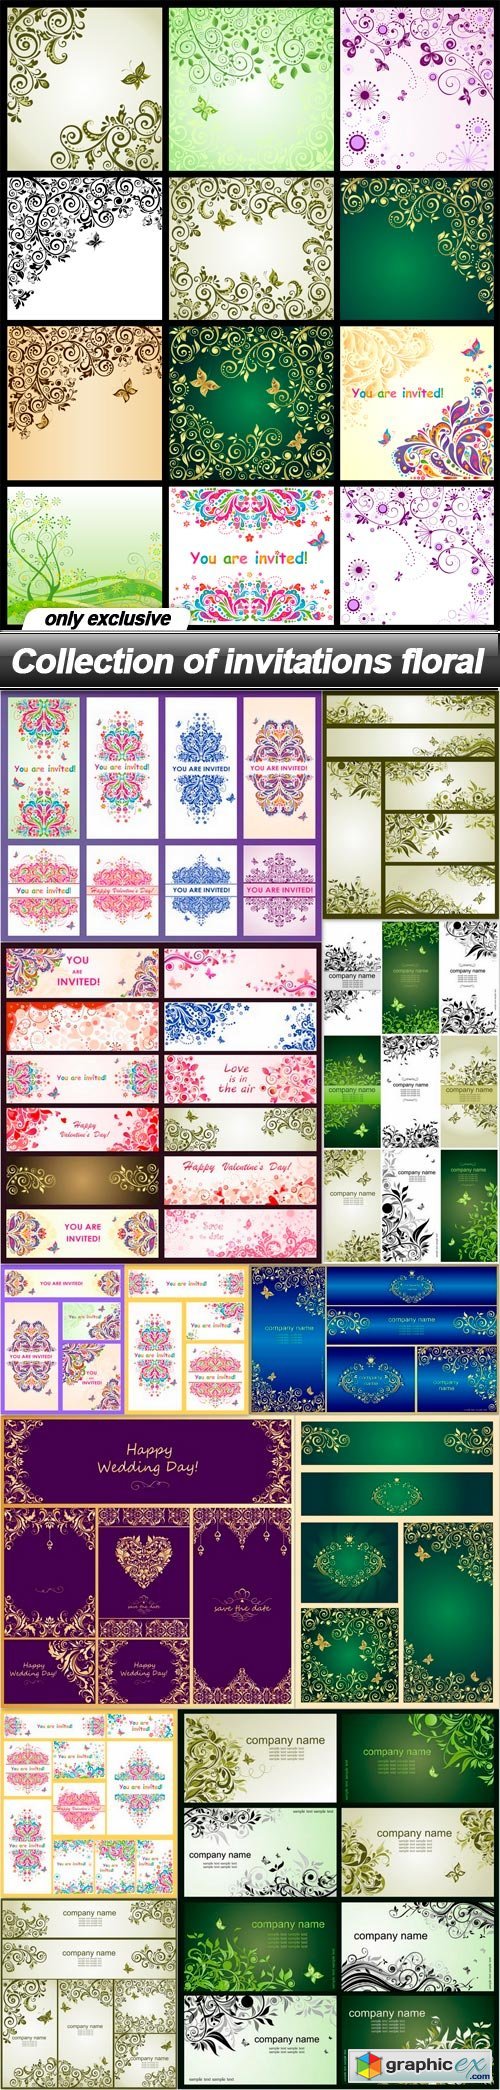 Collection of invitations floral - 12 EPS